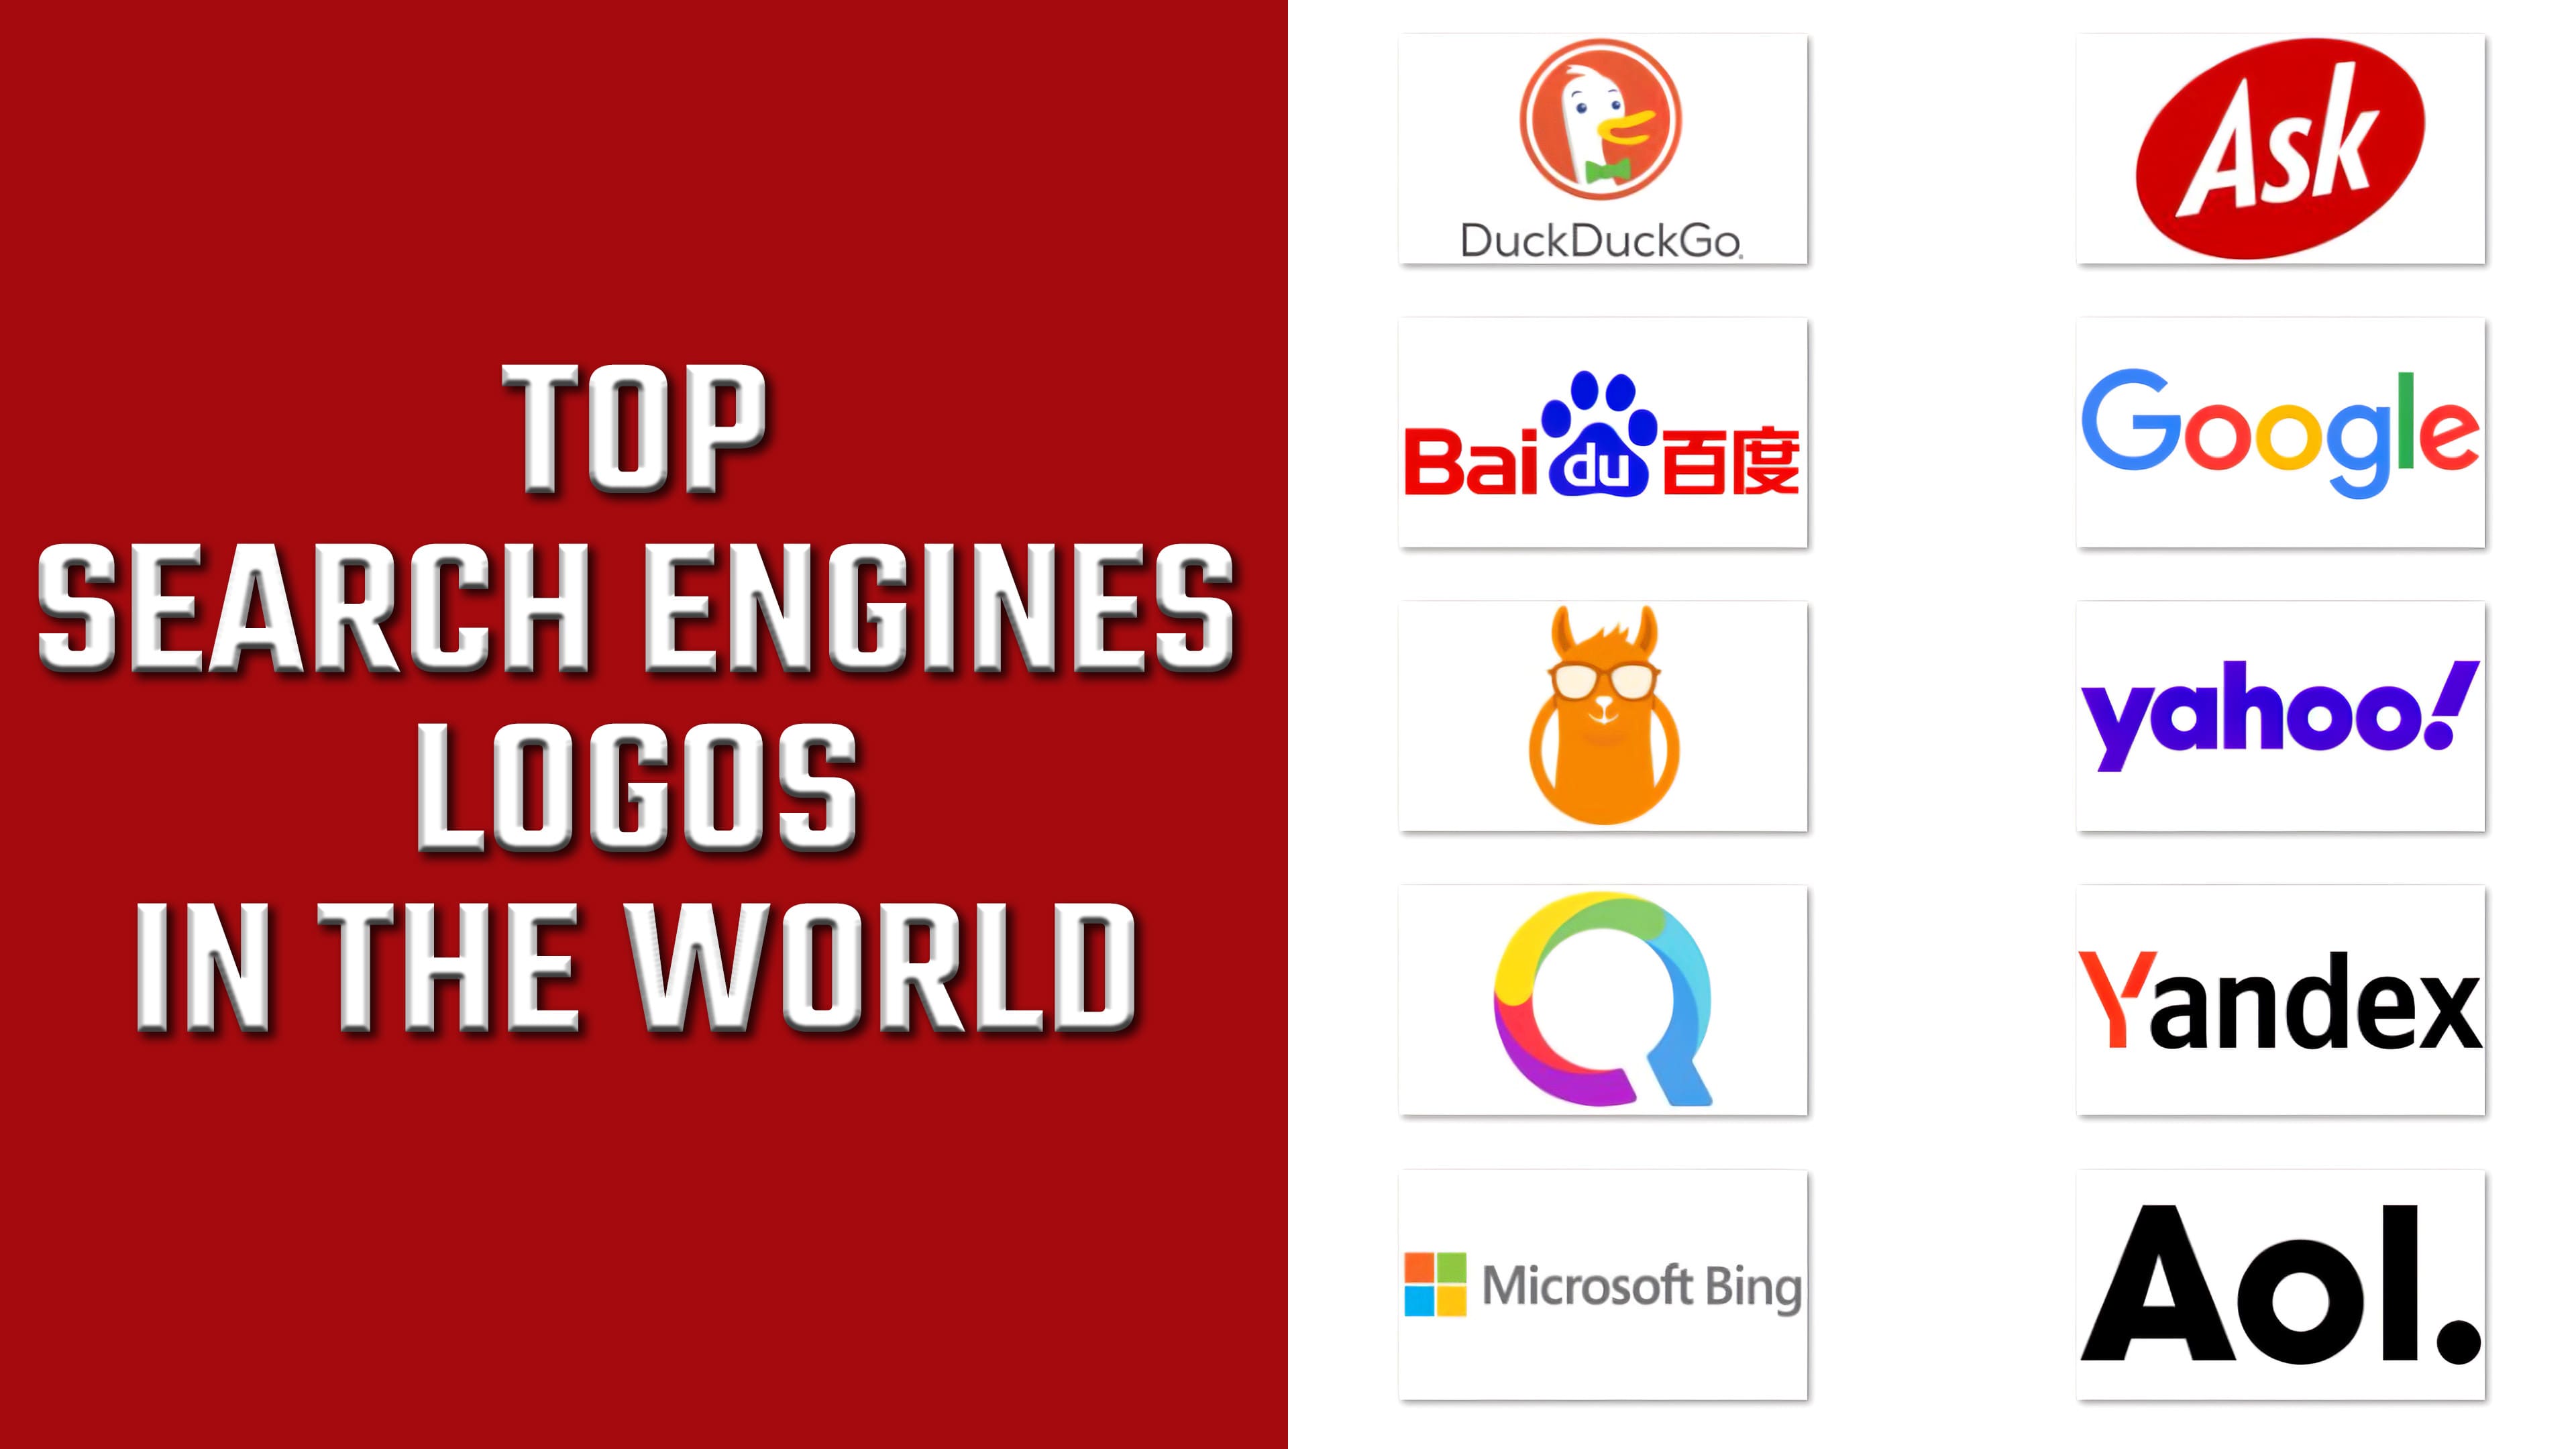 Top Search Engines Logos in the World